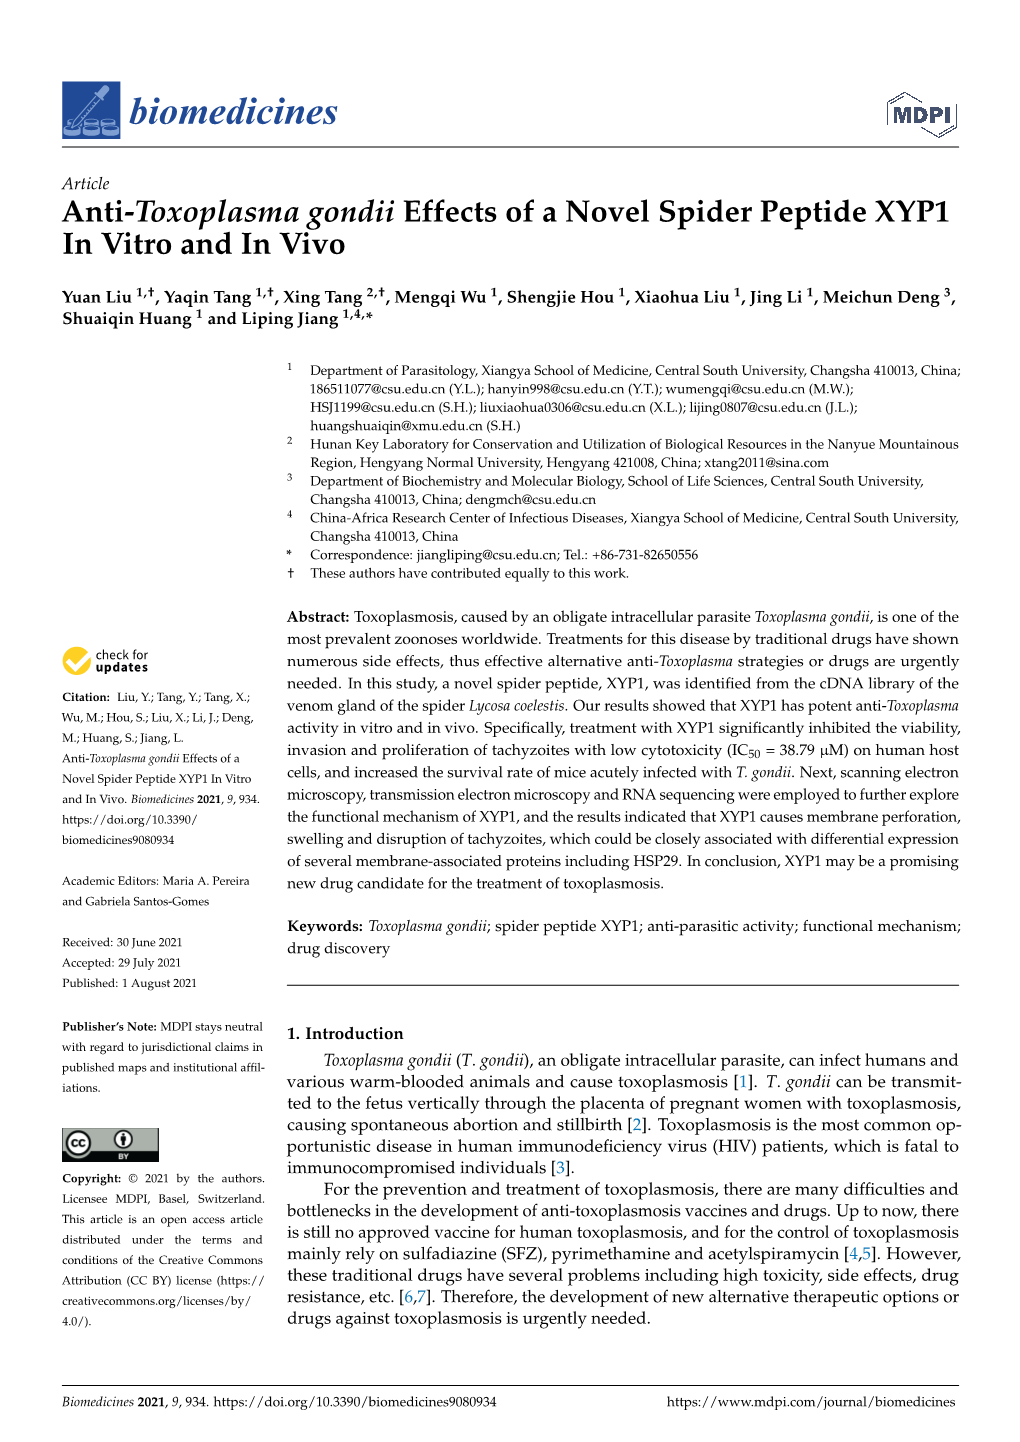 Anti-Toxoplasma Gondii Effects of a Novel Spider Peptide XYP1 in Vitro and in Vivo